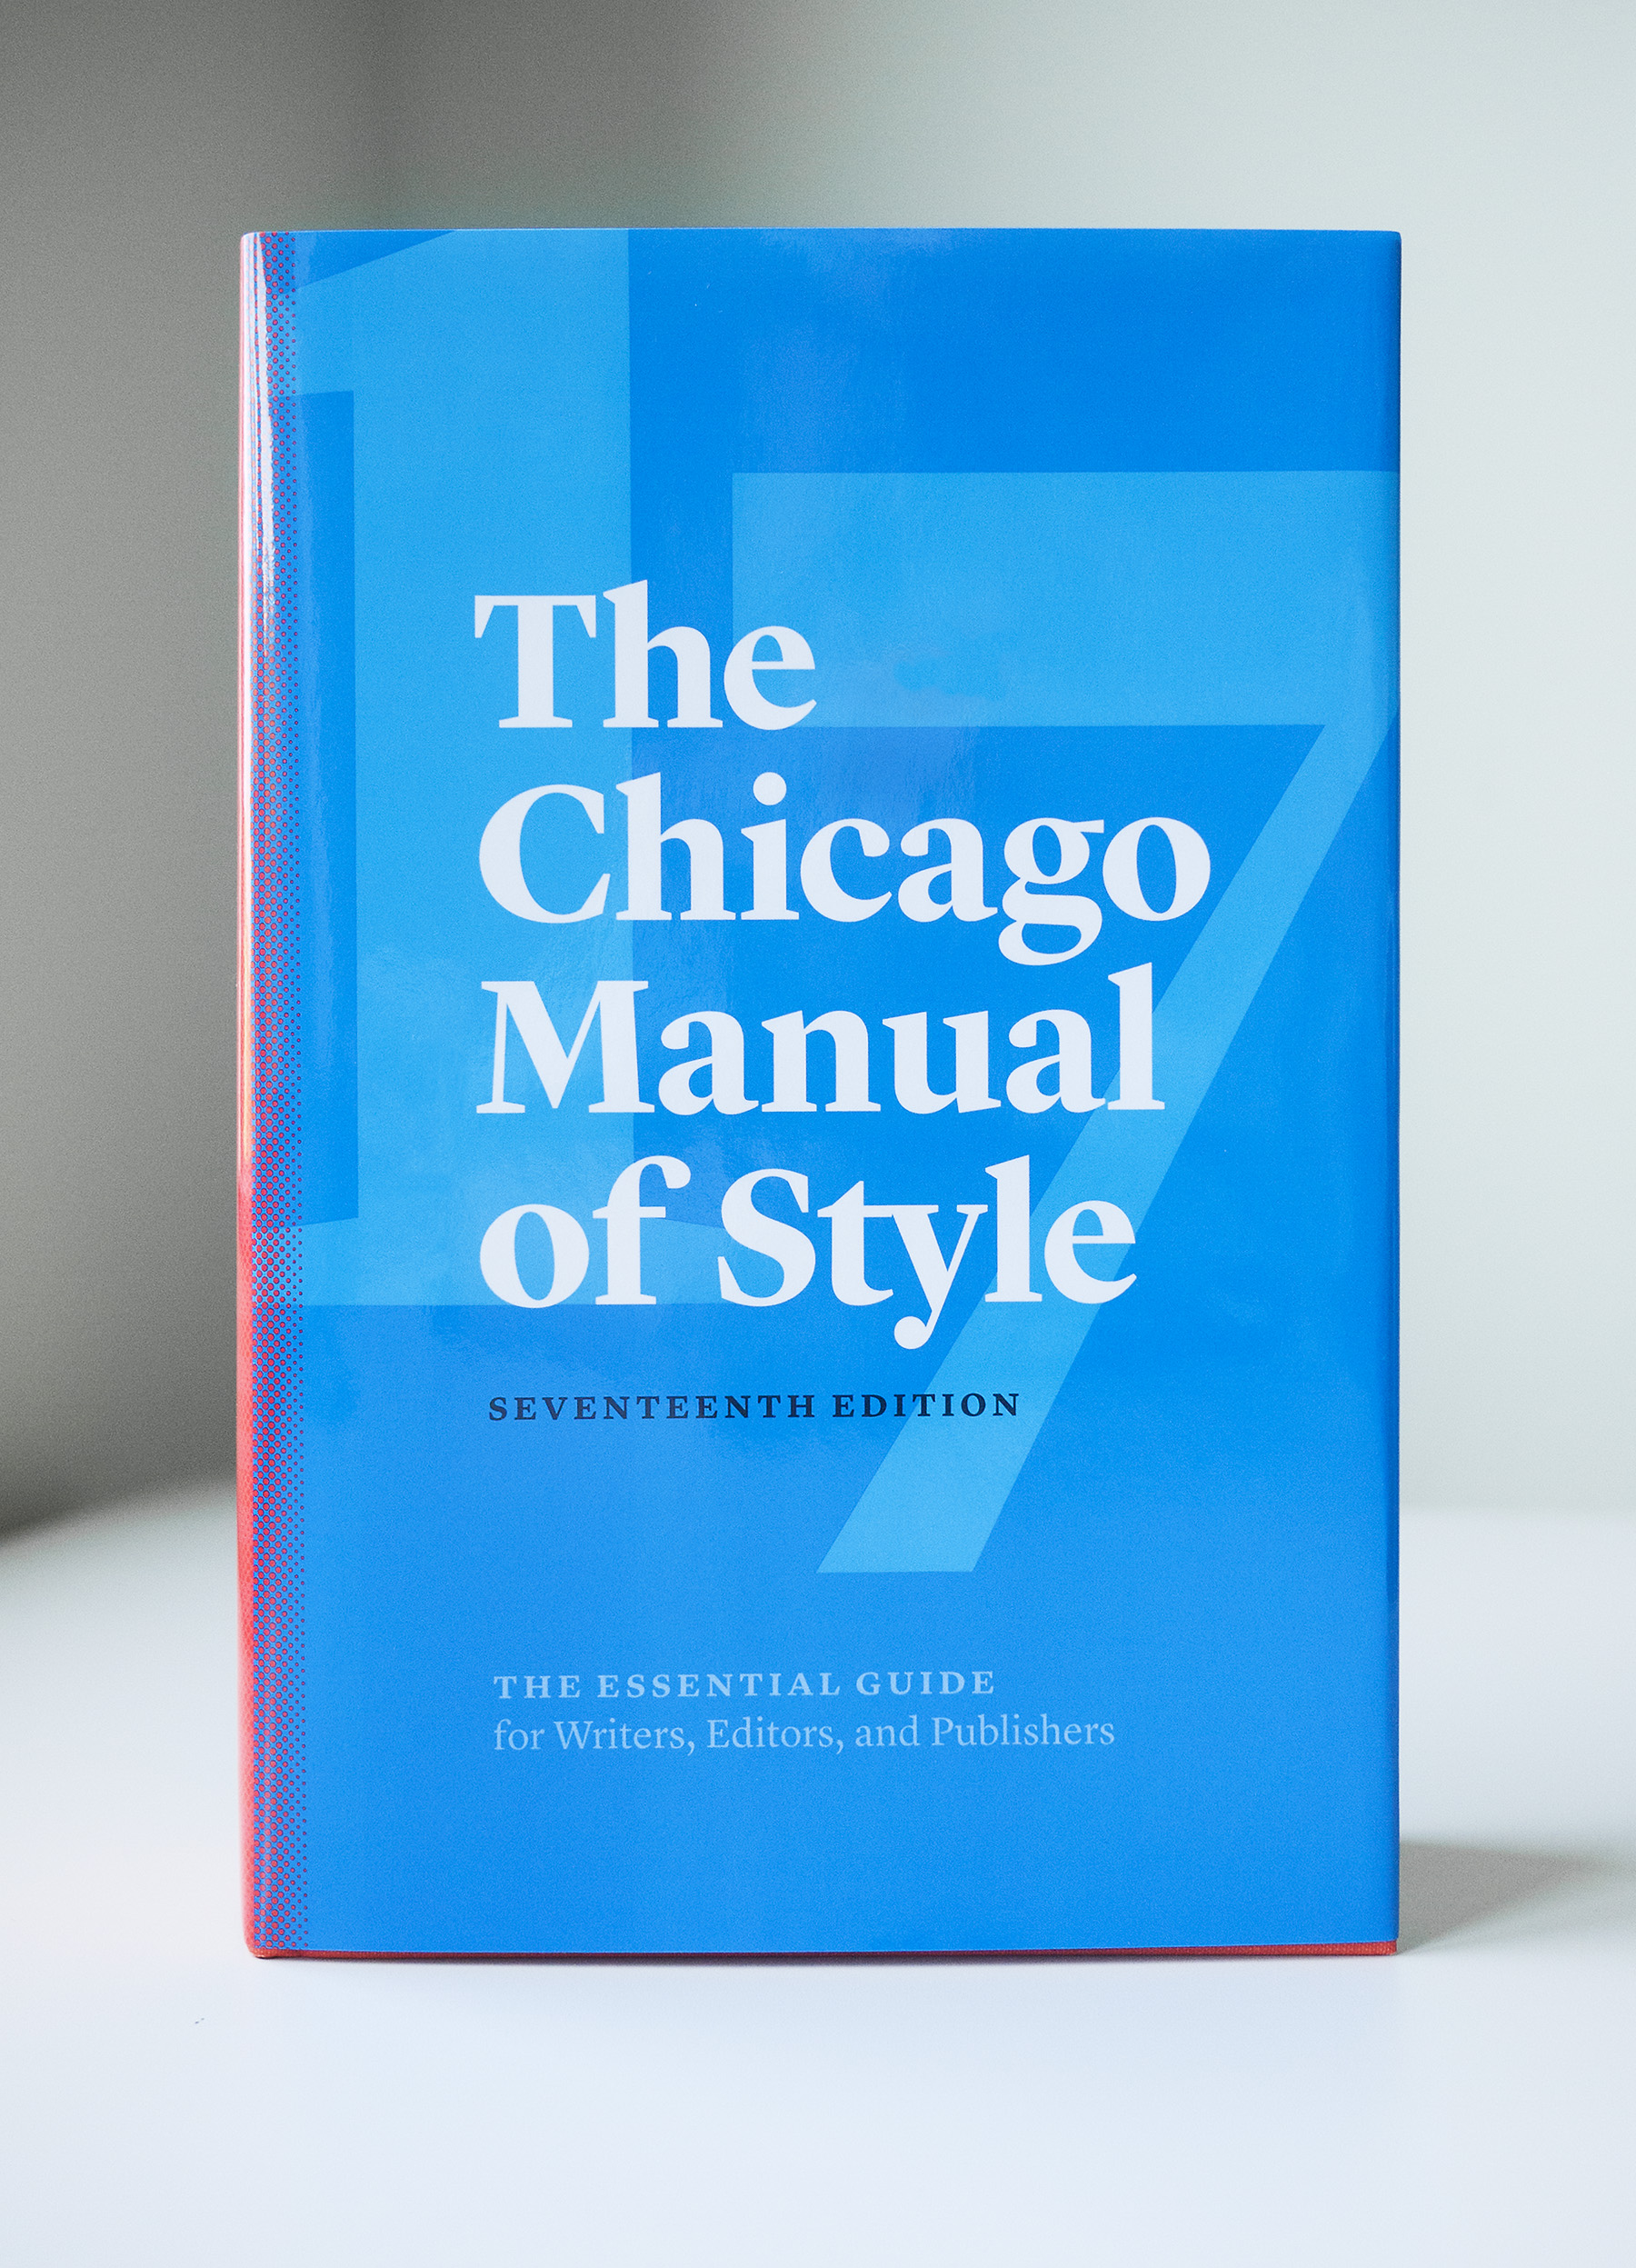 Decorative, image of chicago style manual book